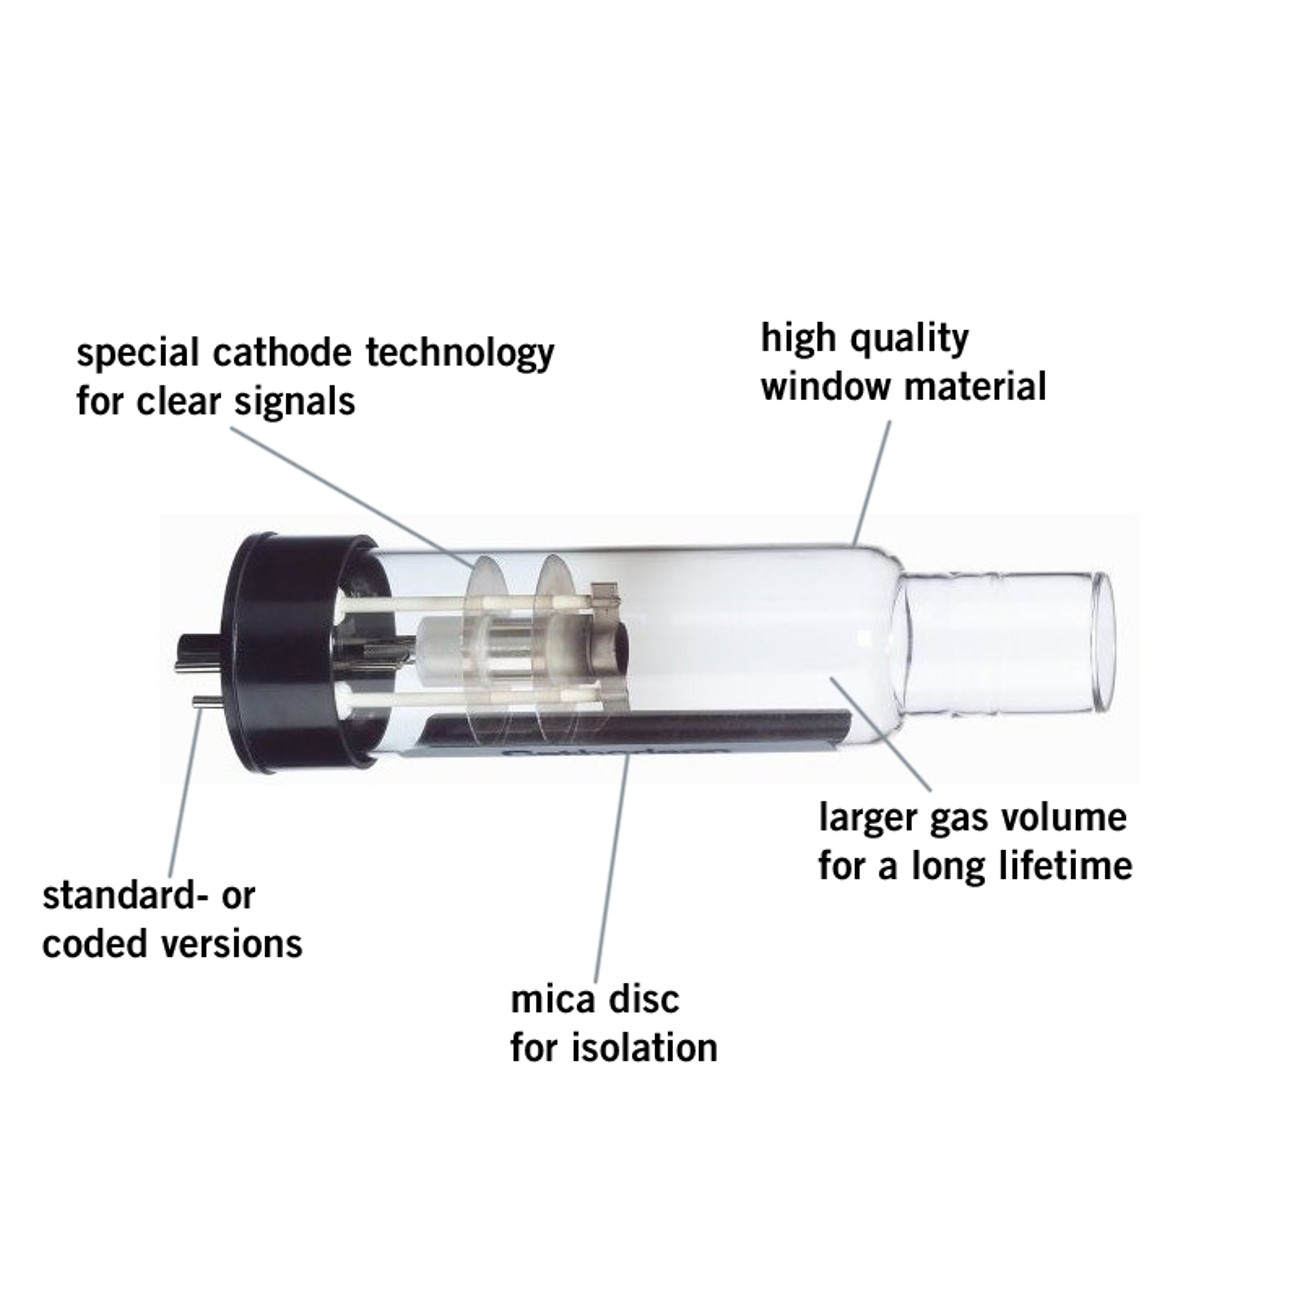 Parts of the hollow cathode lamp